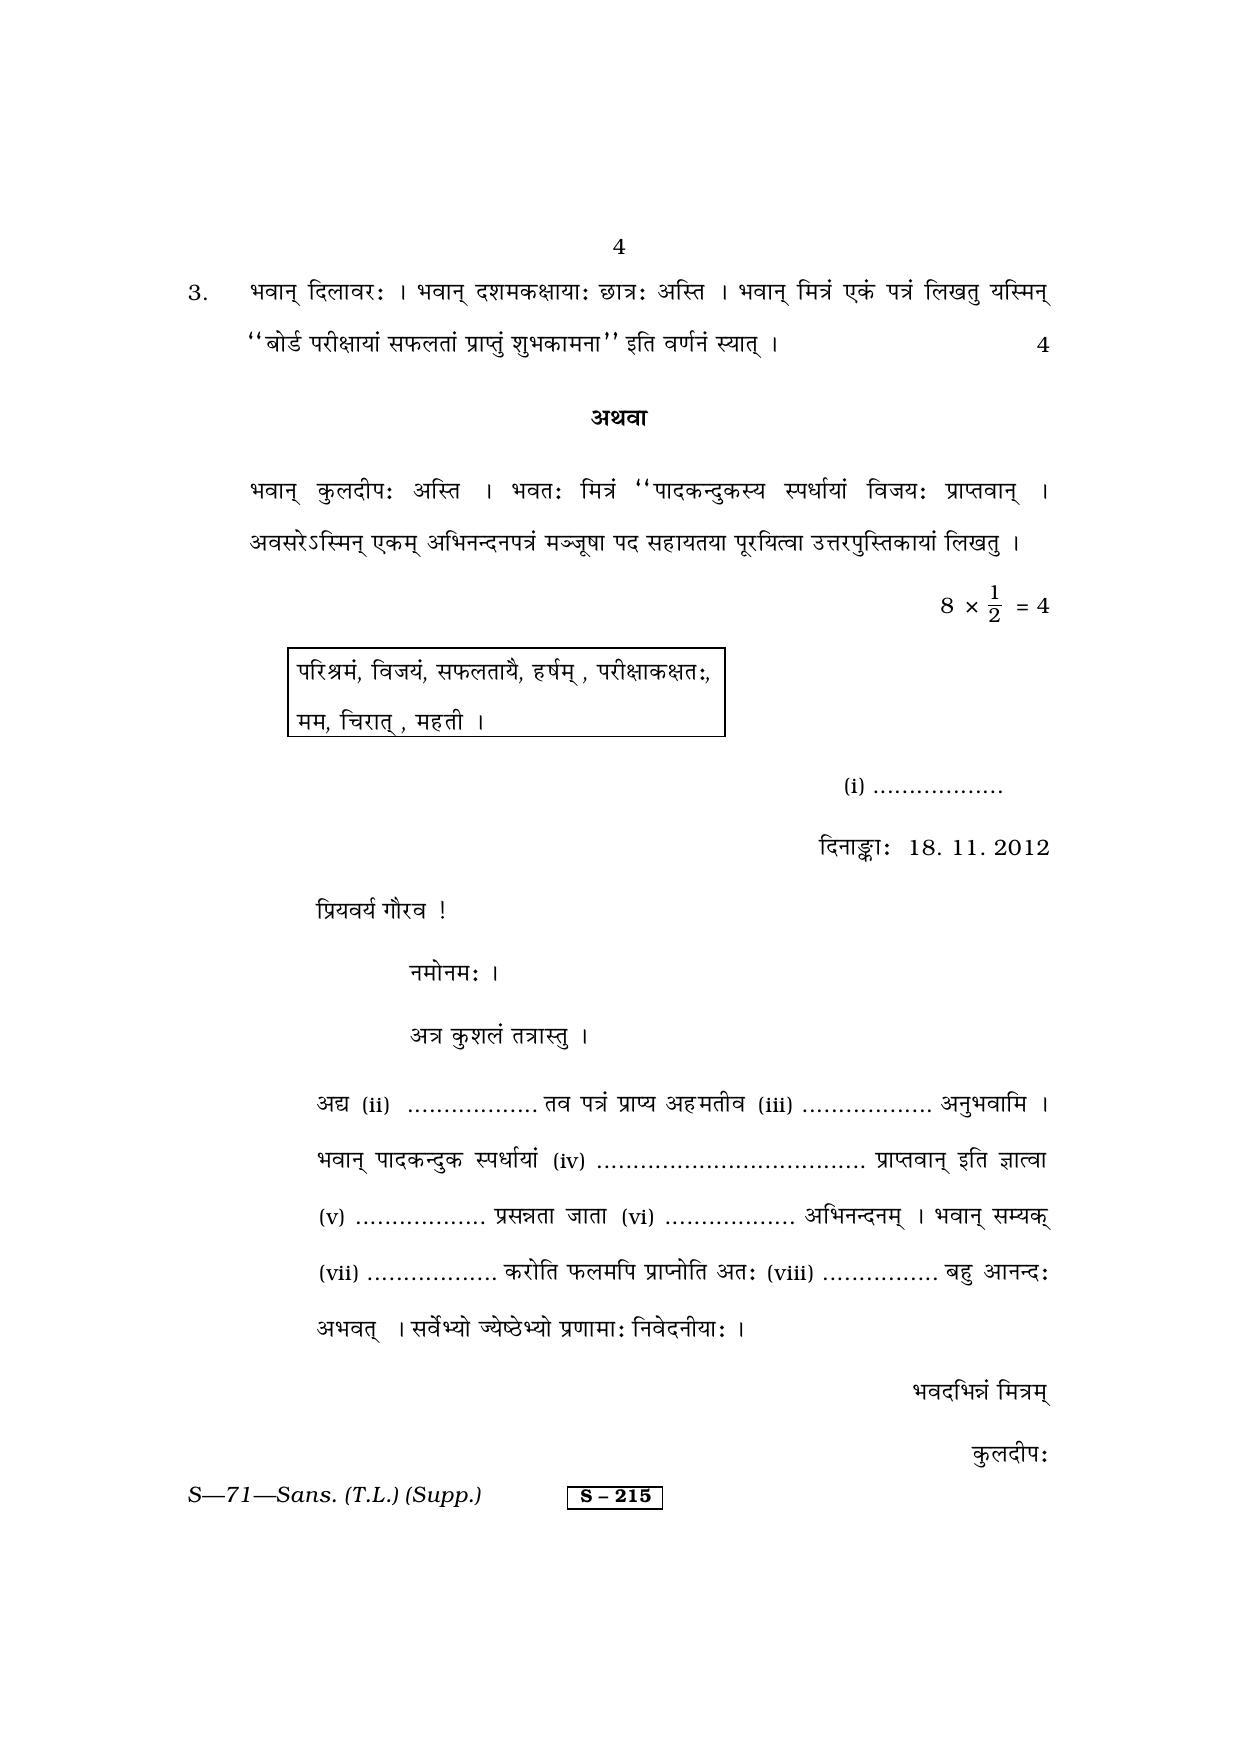 RBSE Class 10 Sanskrit (T.L.) Supplementary 2013 Question Paper - Page 4